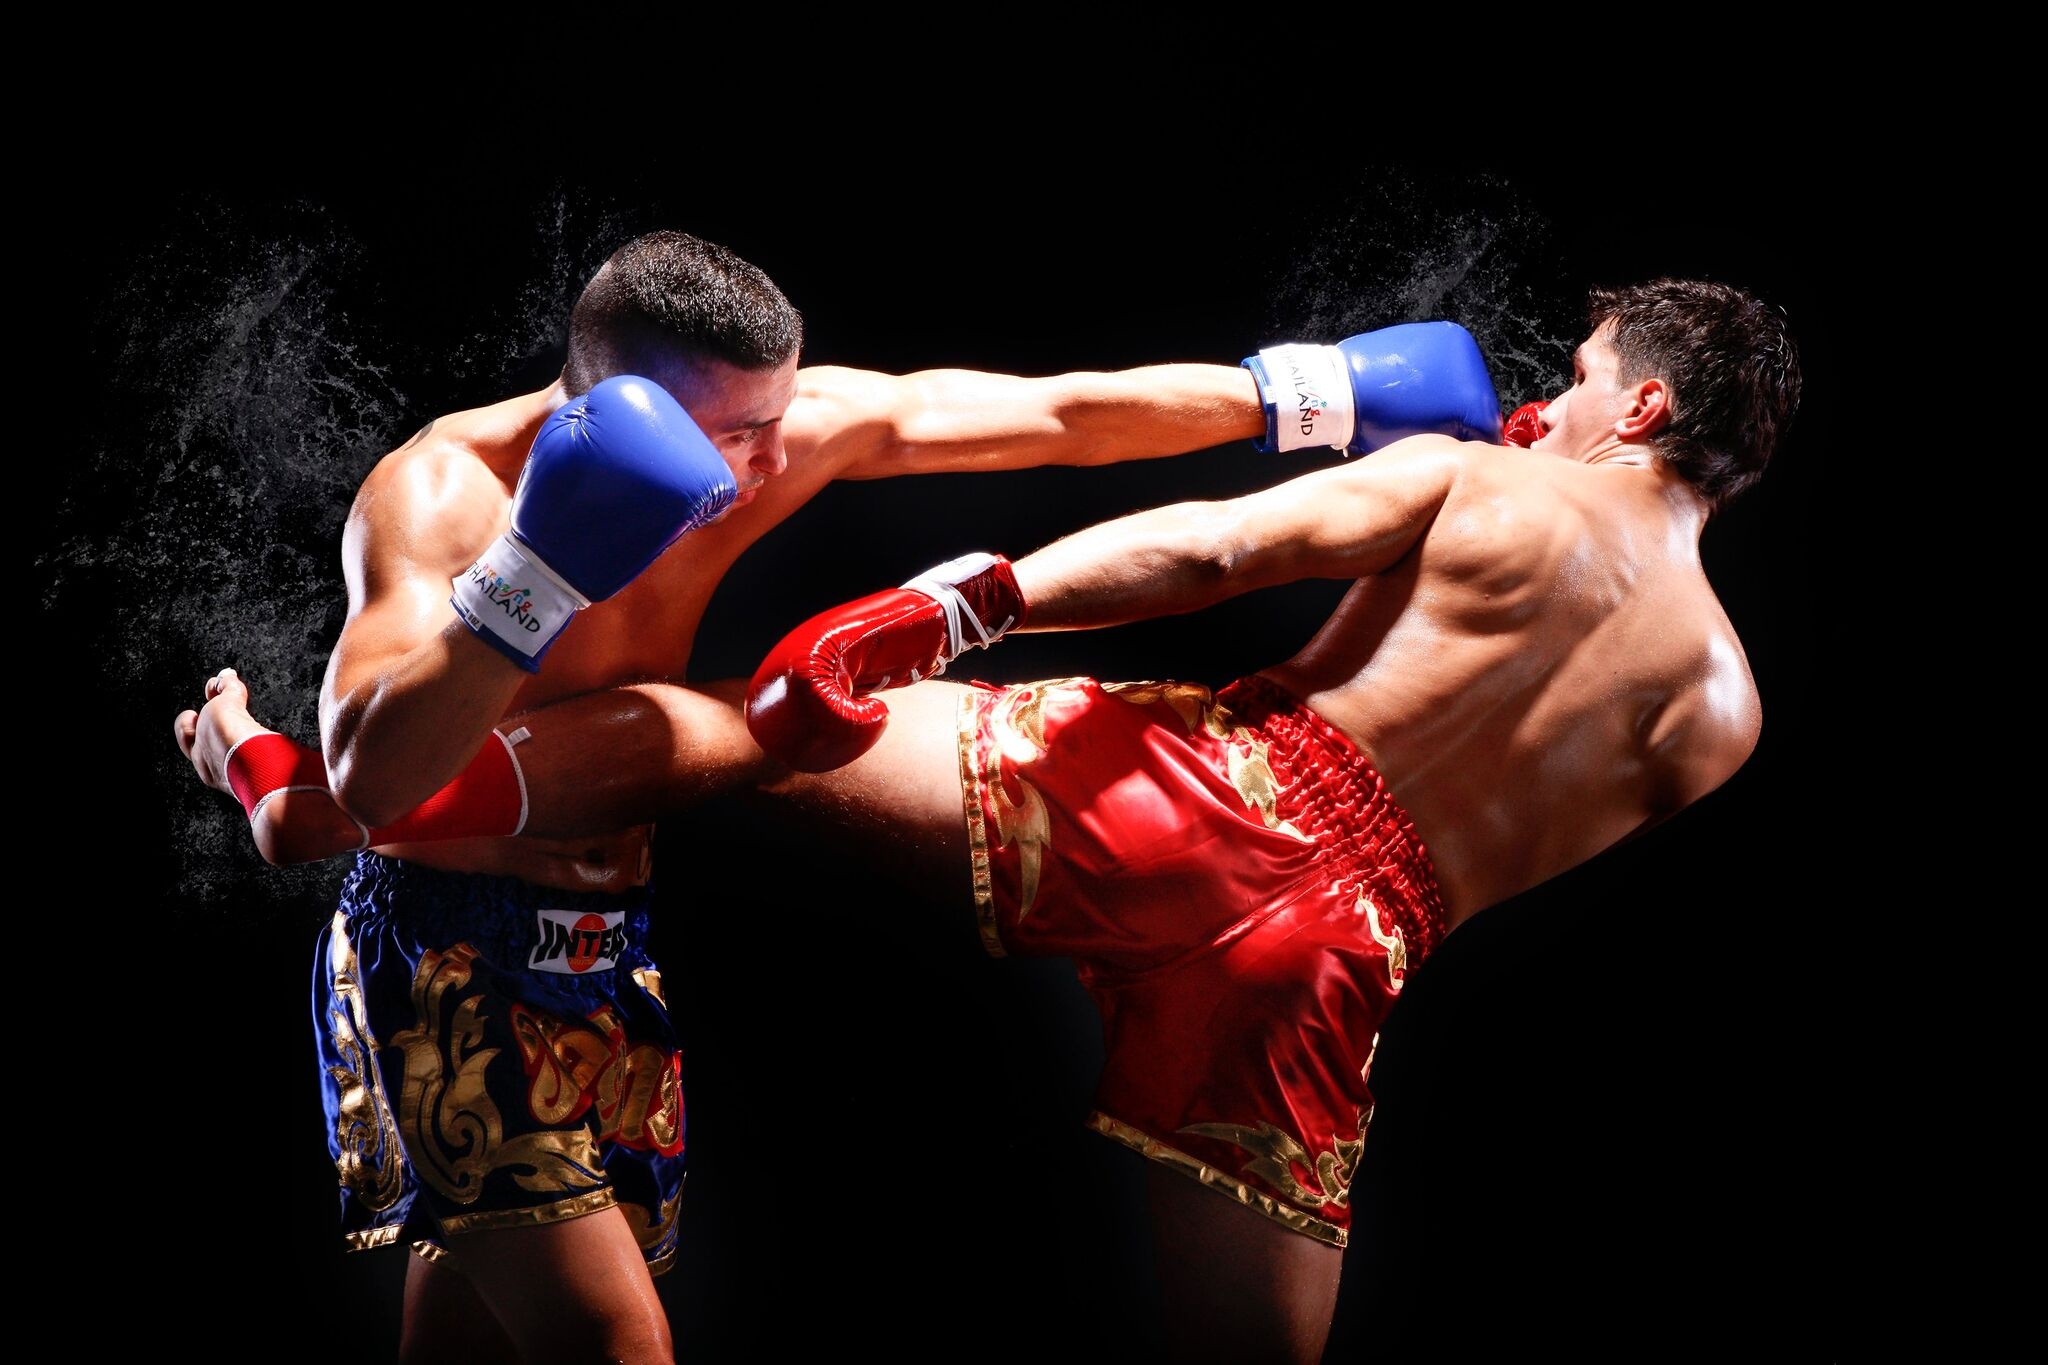 Muay Thai: Thai boxing, A combat sport that uses stand-up striking along with various clinching techniques. 2050x1370 HD Wallpaper.